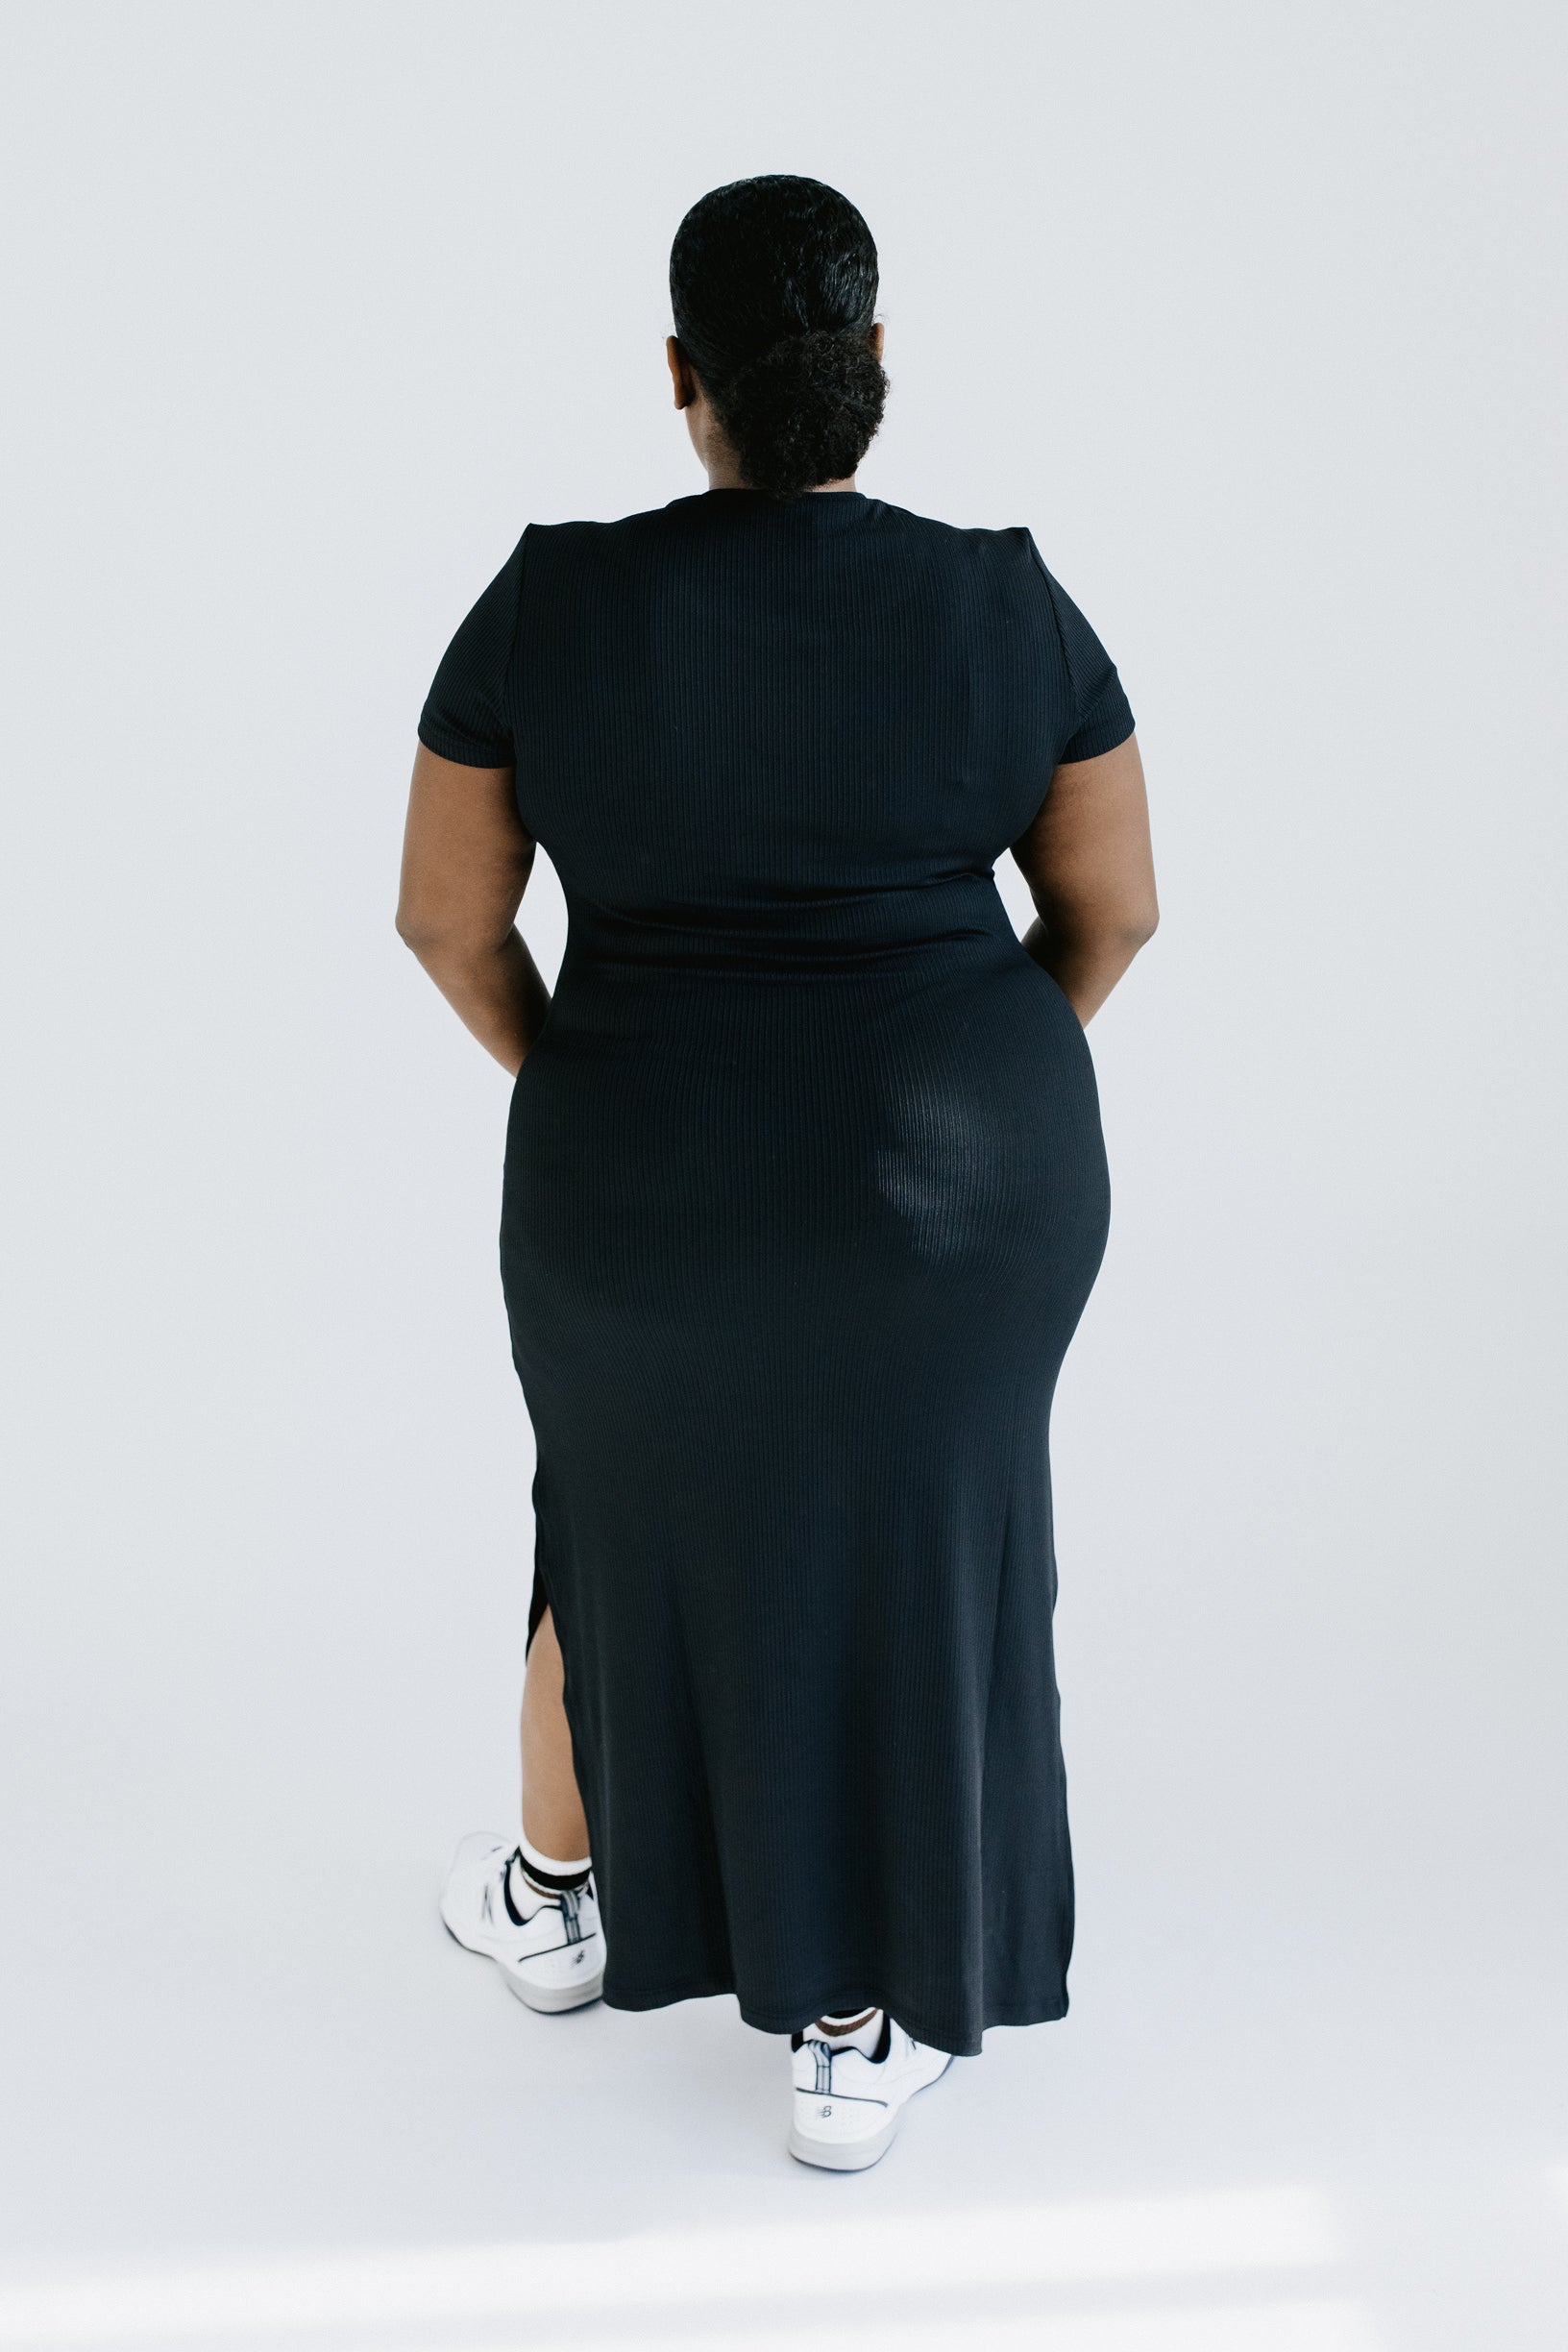 More Sizes Dresses & Rompers - THELIFESTYLEDCO Shop